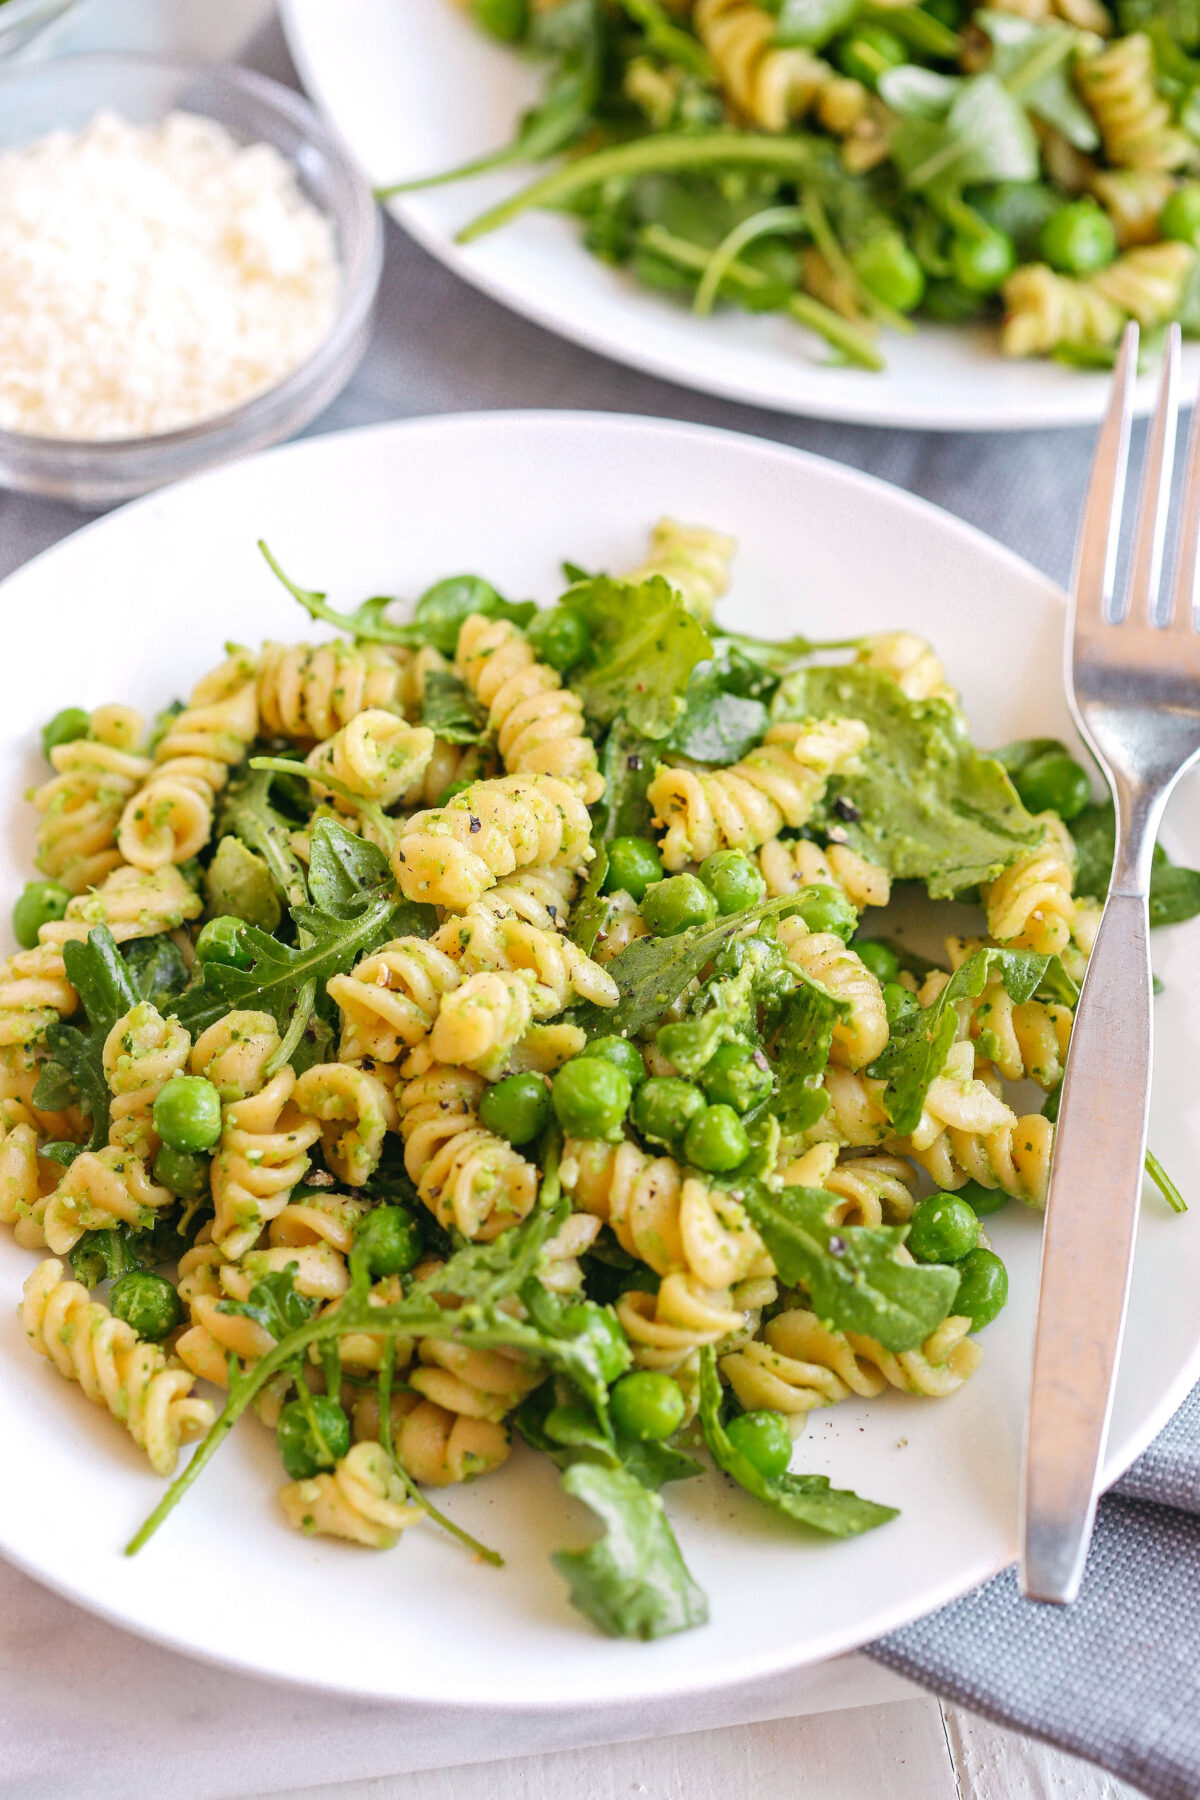 This light and fresh Pea and Arugula Pesto Pasta Salad is the perfect meal or side dish that is easy to make, healthy and delicious!